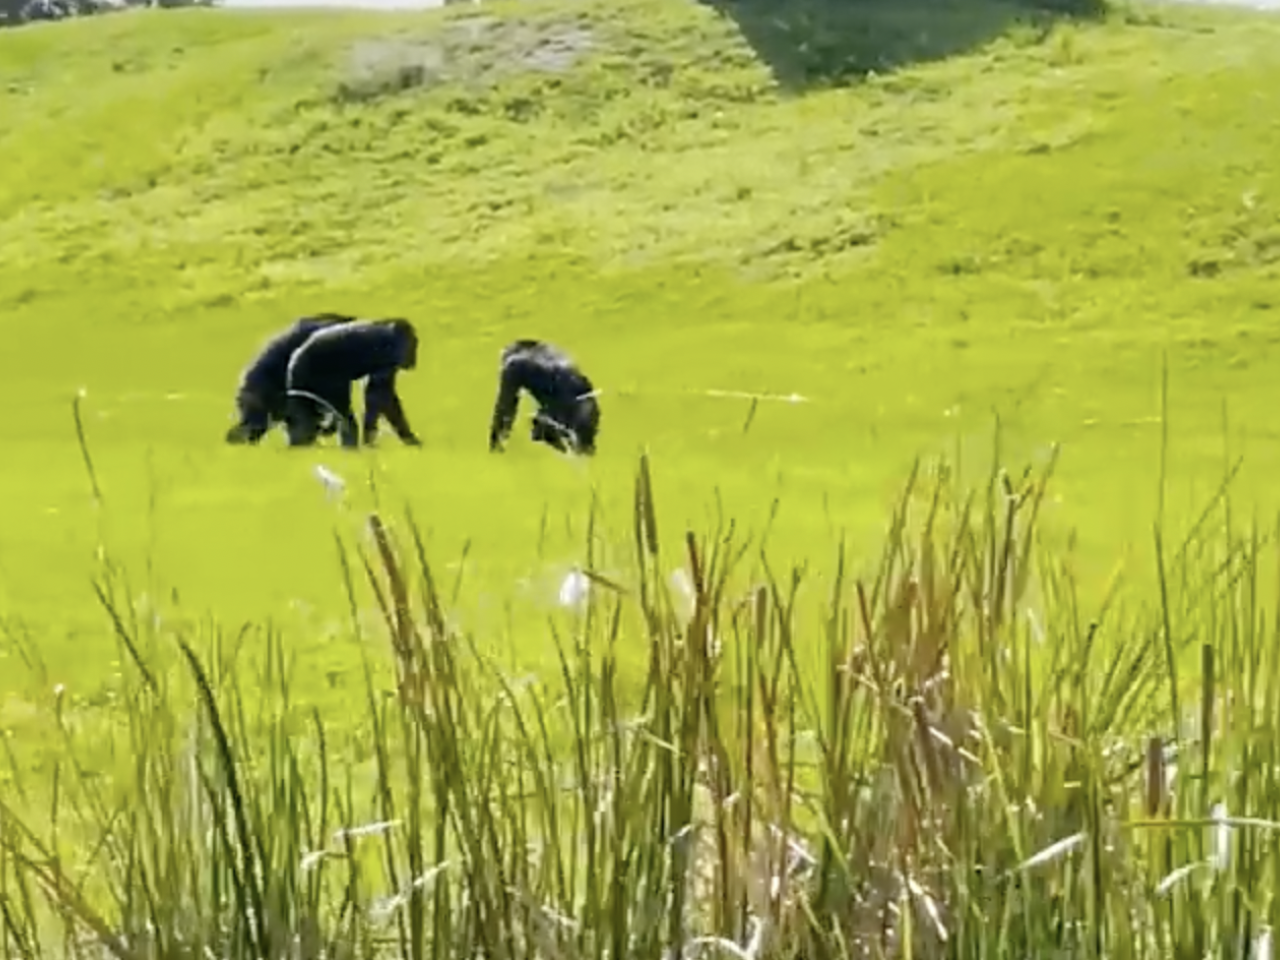 Three chimps walking in the grass